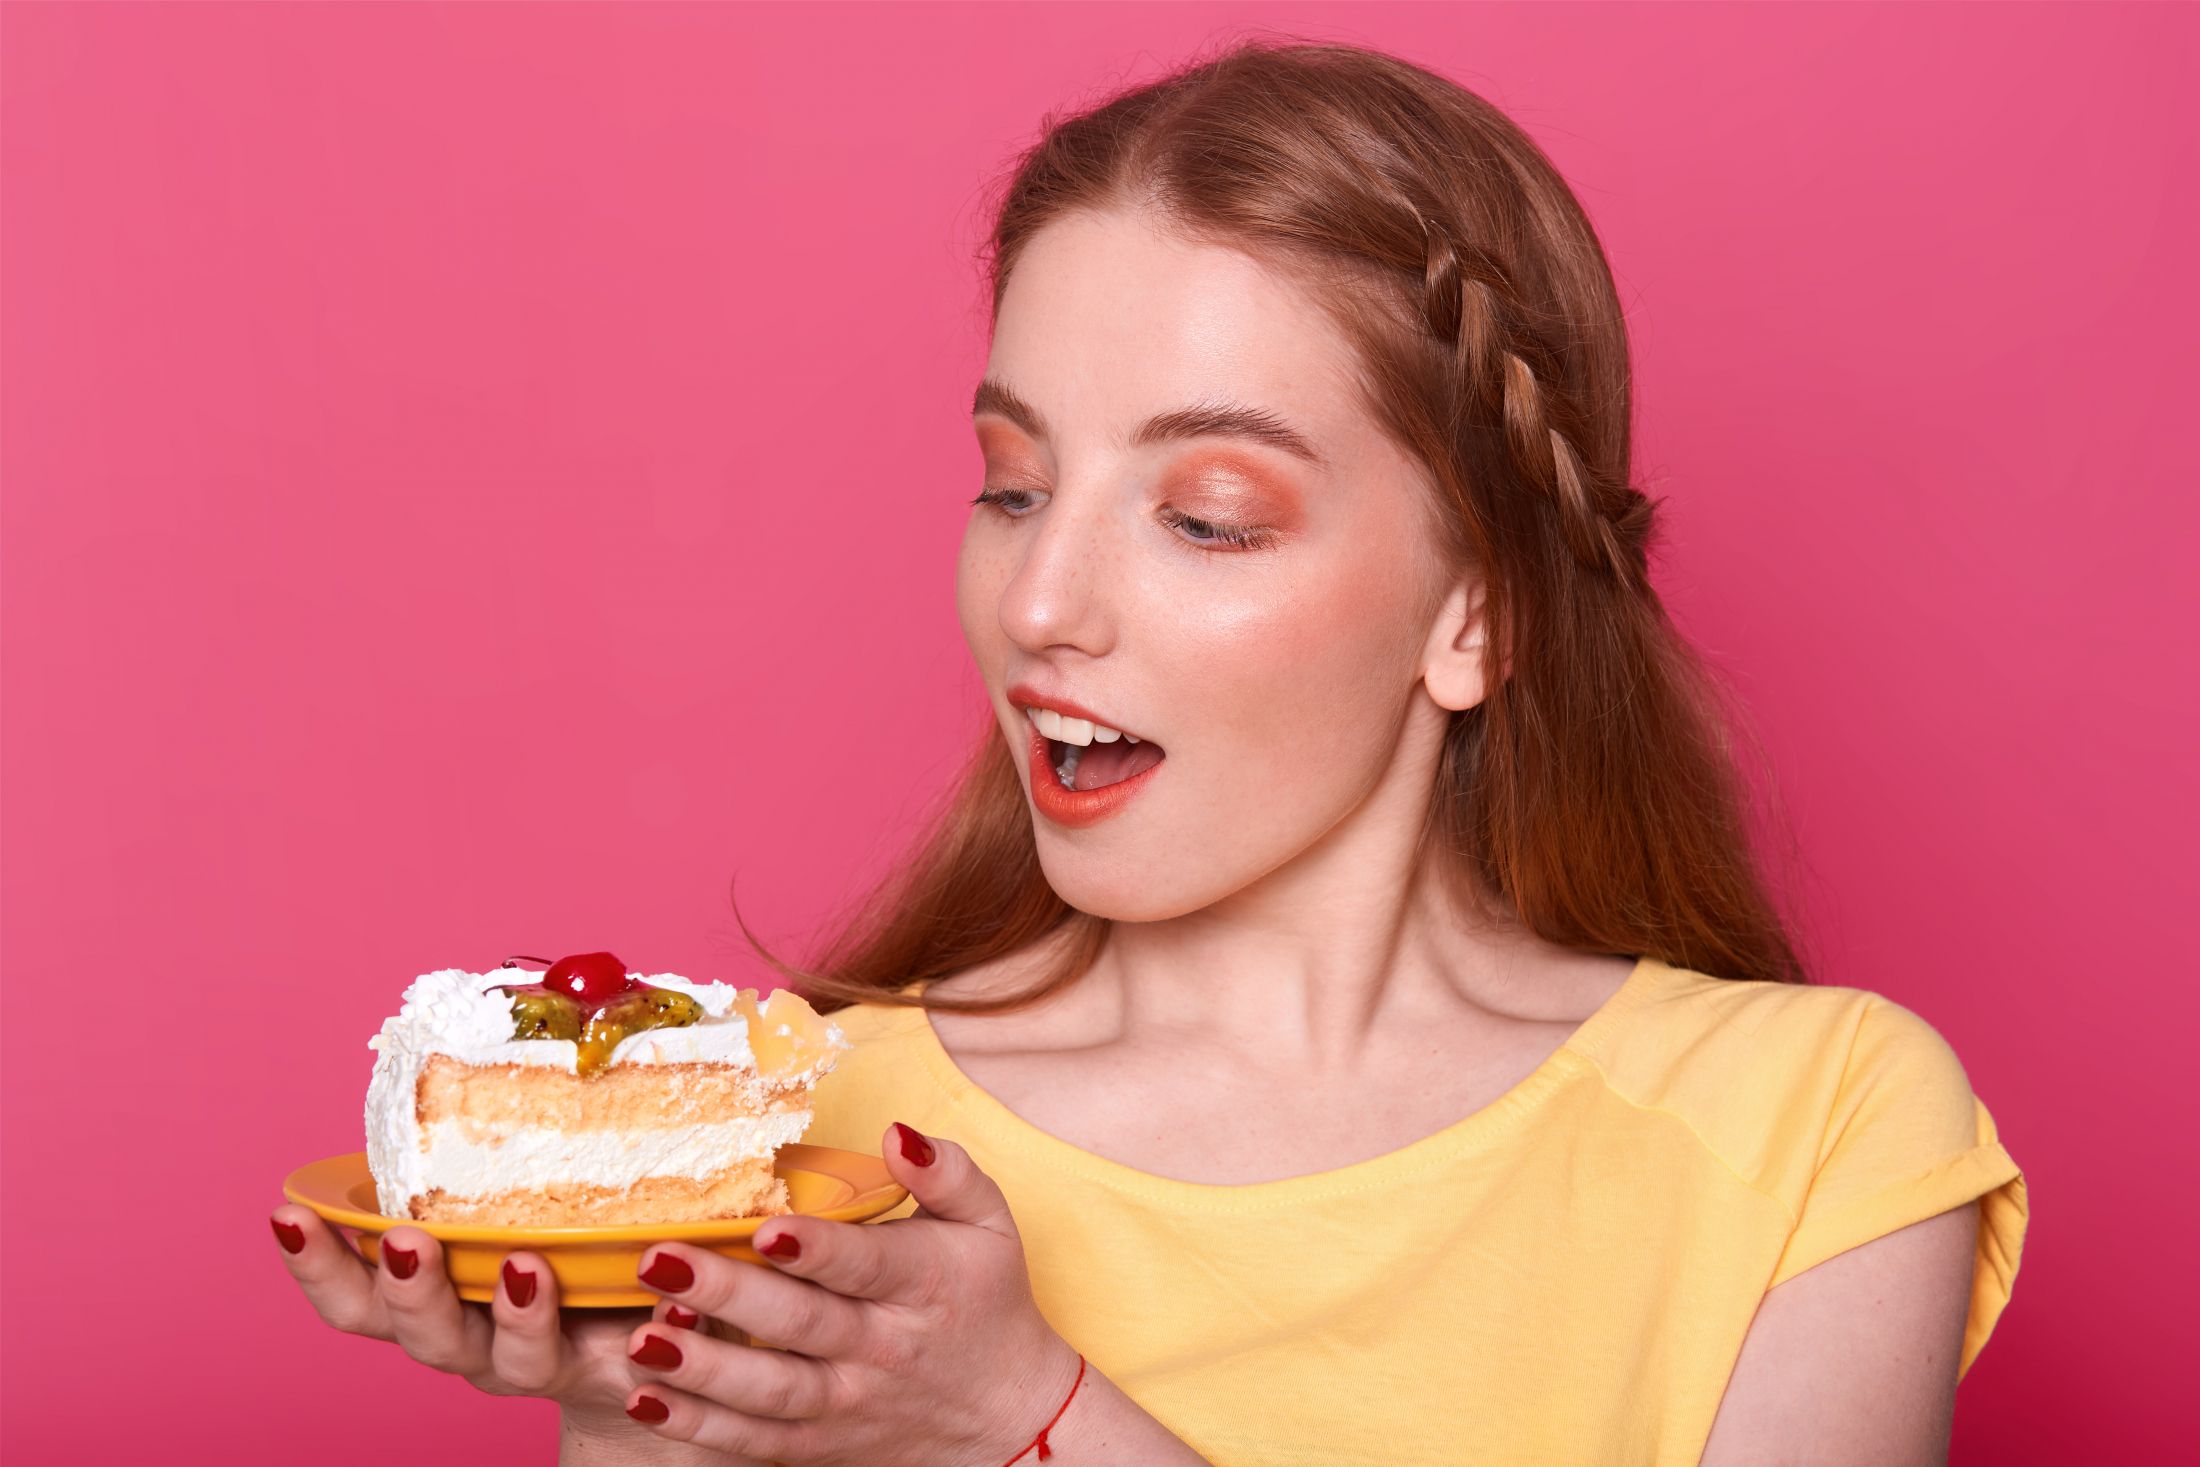 attractive-young-woman-with-opened-mouth-holds-plate-with-piece-delicious-cake-hands-brown-haired-lady-with-red-manicure.jpg